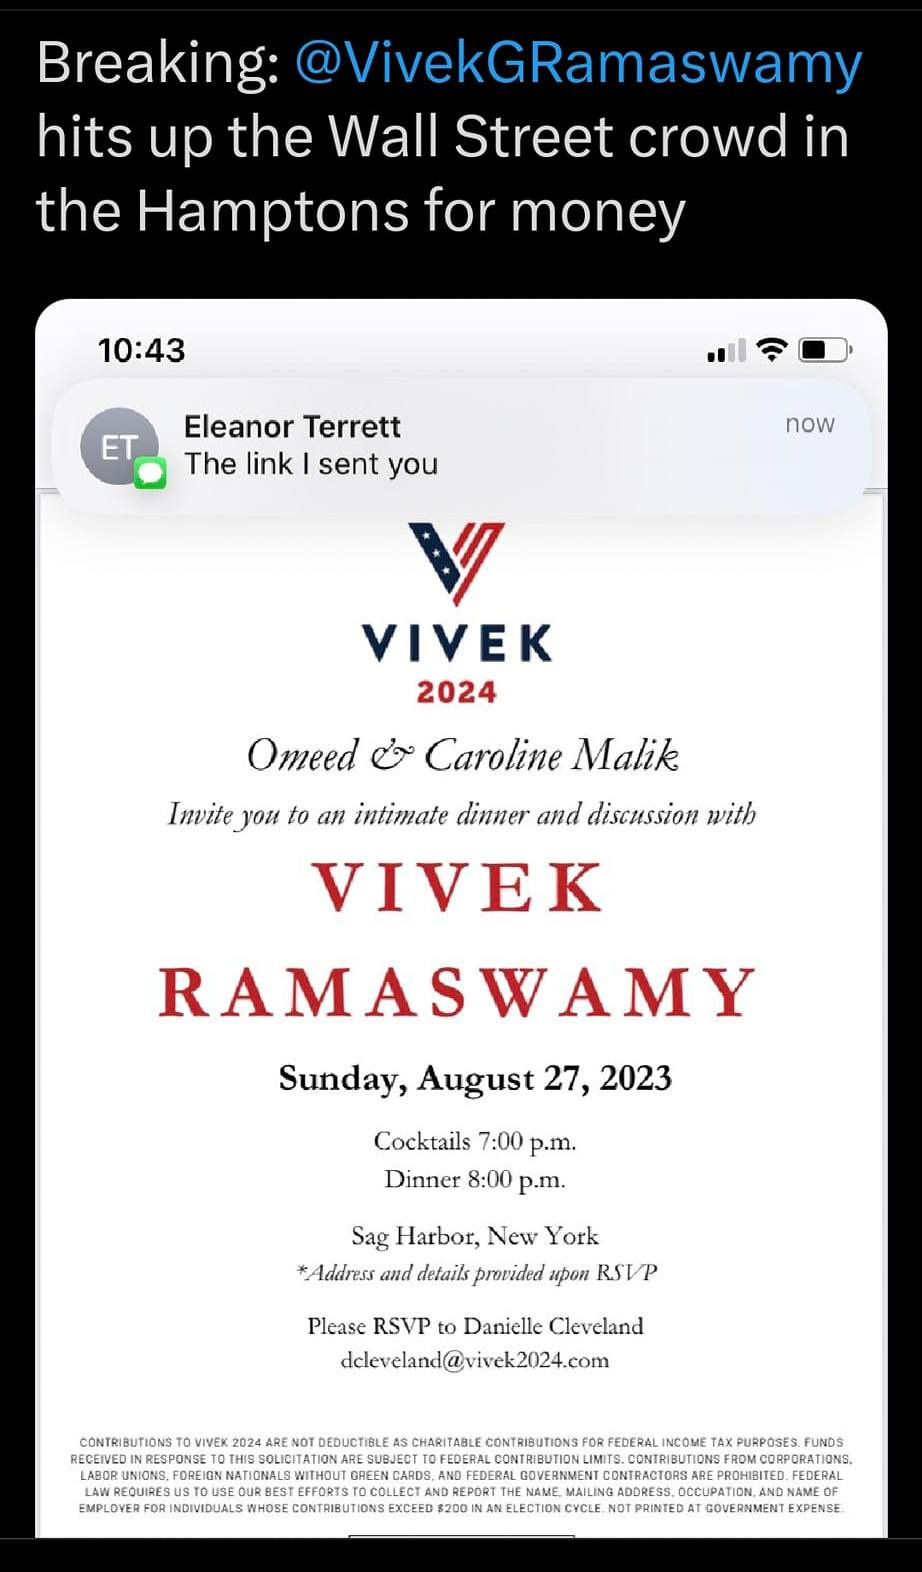 May be an image of ‎text that says '‎8:42 8:42X 53% Post Breaking: @VivekGRamaswamy hits up the Wall Street crowd in the Hamptons for money 10:43 ET Eleanor Terrett The link sent you now VIVEK 2024 Omeed ح& Caroline Malik Invite you an intimate dinner ana discussion with VIVEK RAMASWAMY Sunday, August 27, 2023 Cocktails 7:00 p.m. Dinner 8:00 p.m. Sag Harbor, New York *Address details providea RSVP Please RSVP Danielle Cleveland deleveland@vivek2024.com Û rep Post‎'‎